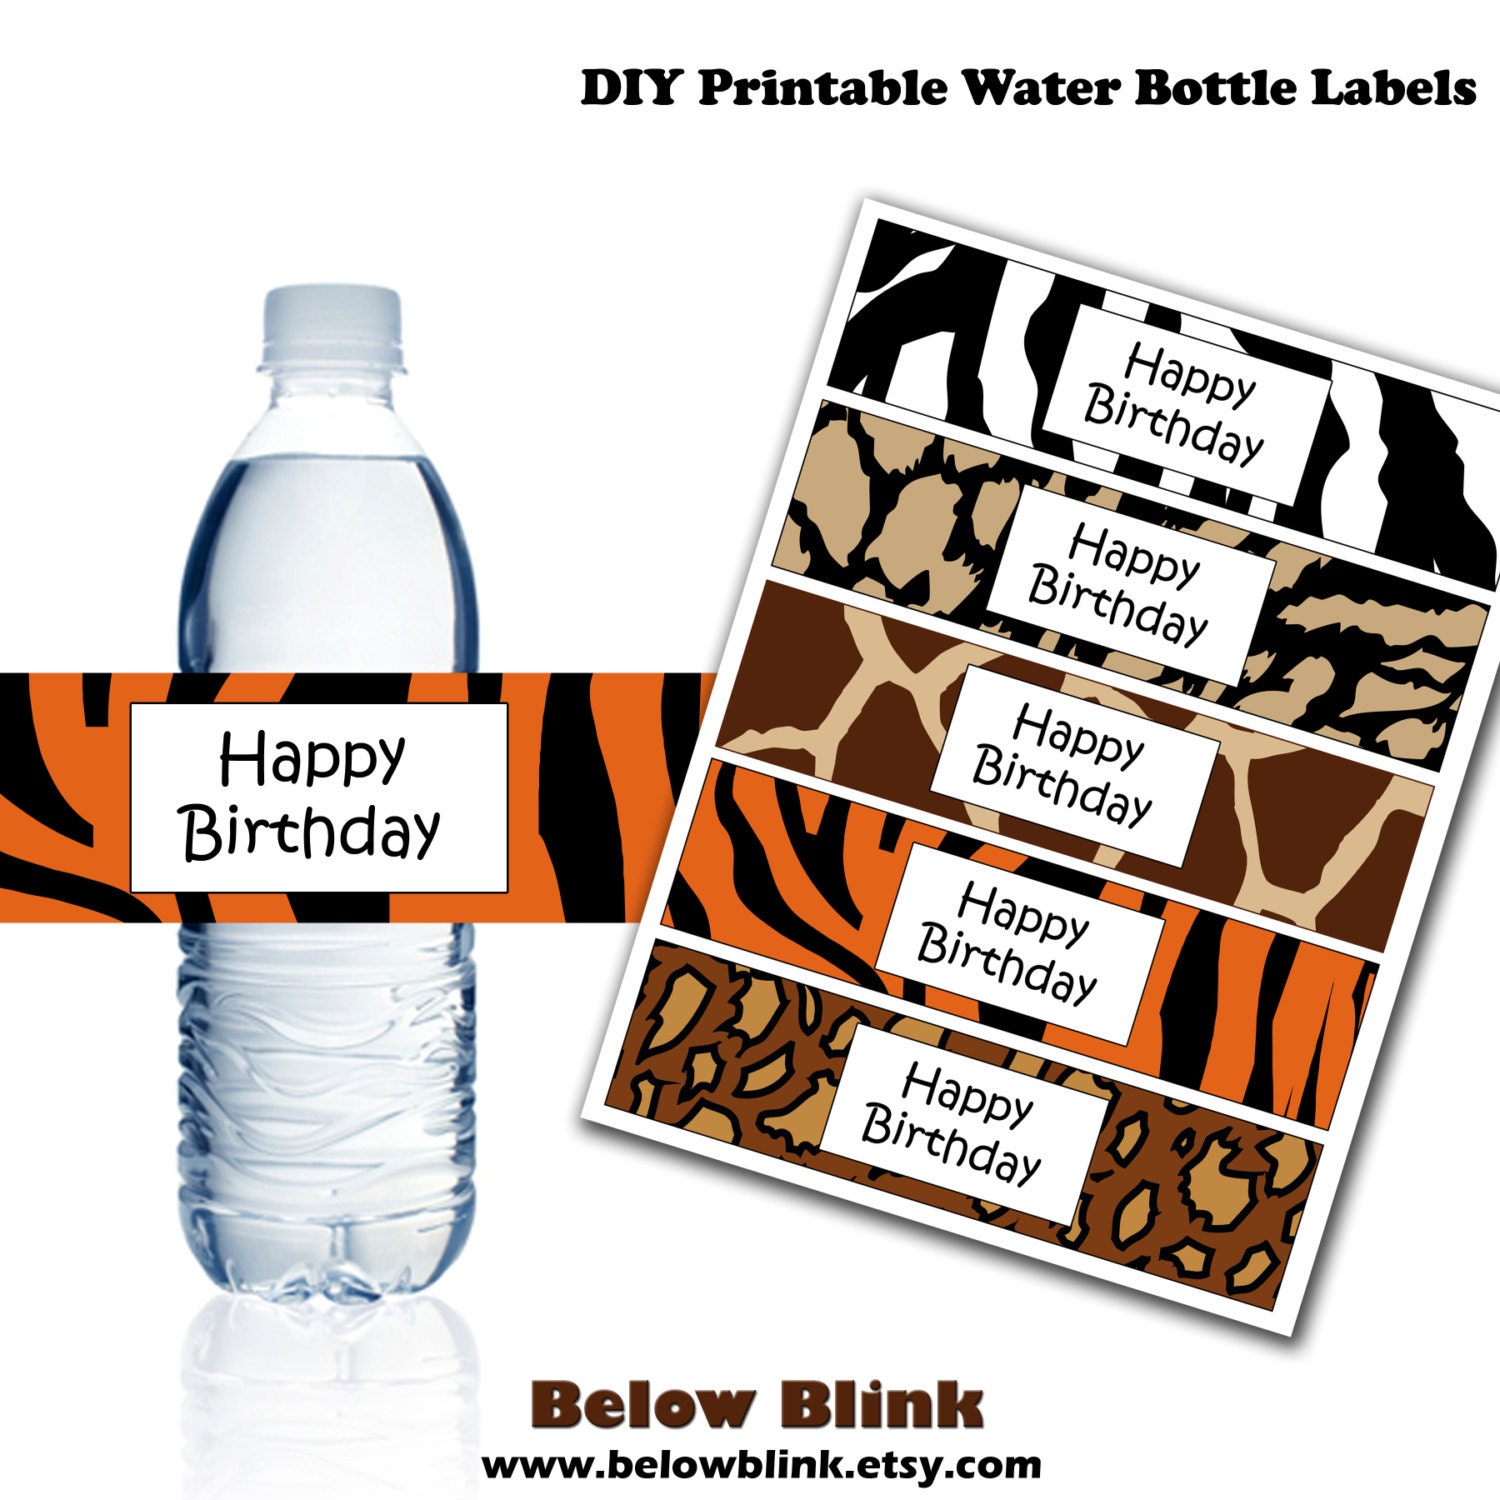 9-sets-of-free-printable-water-bottle-labels-for-every-occasion